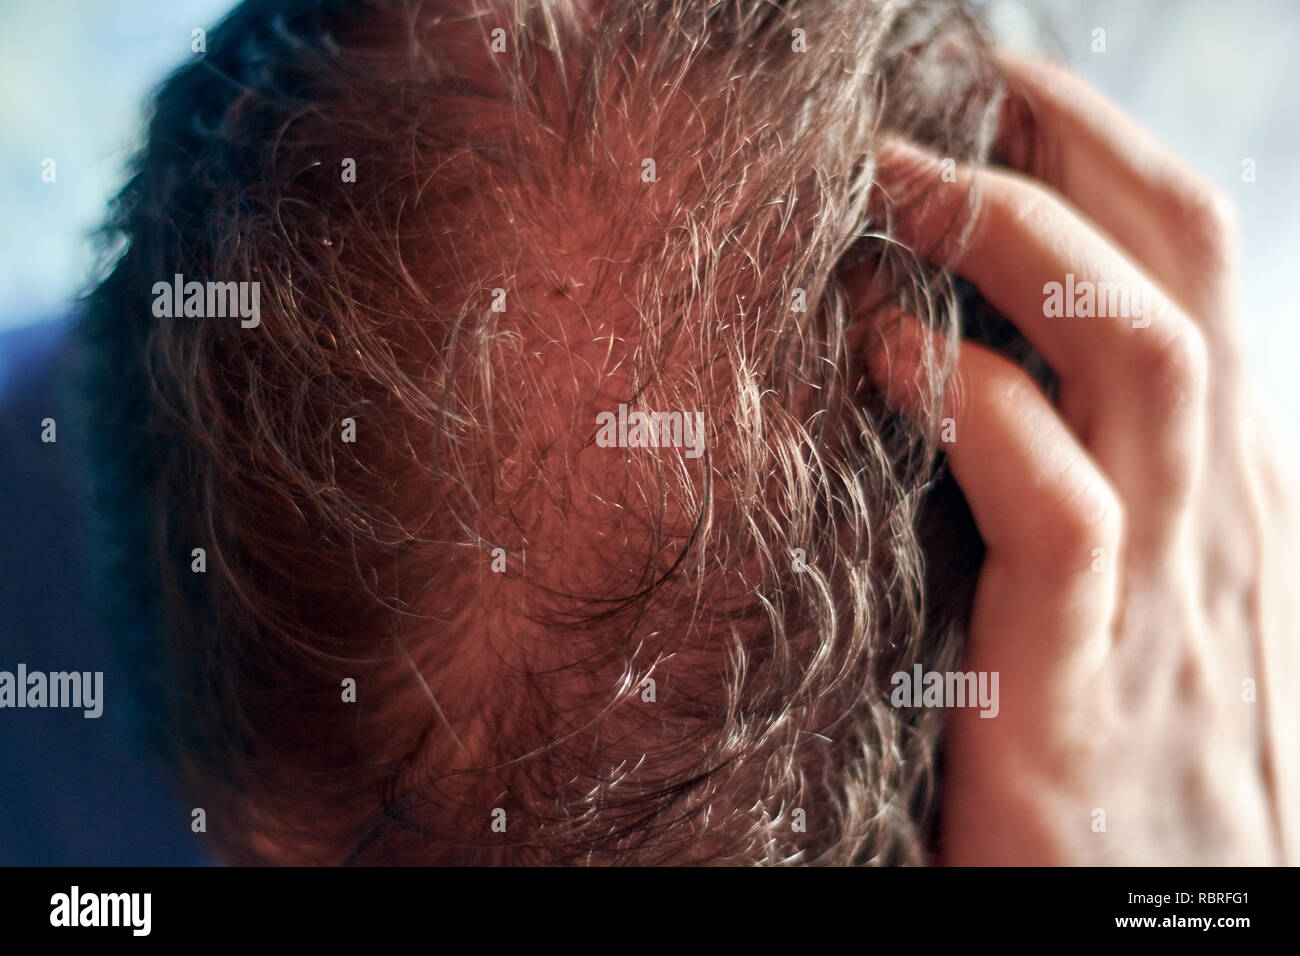 Scalp of young caucasian man seen from above and showcasing a hair loss problem. Stock Photo